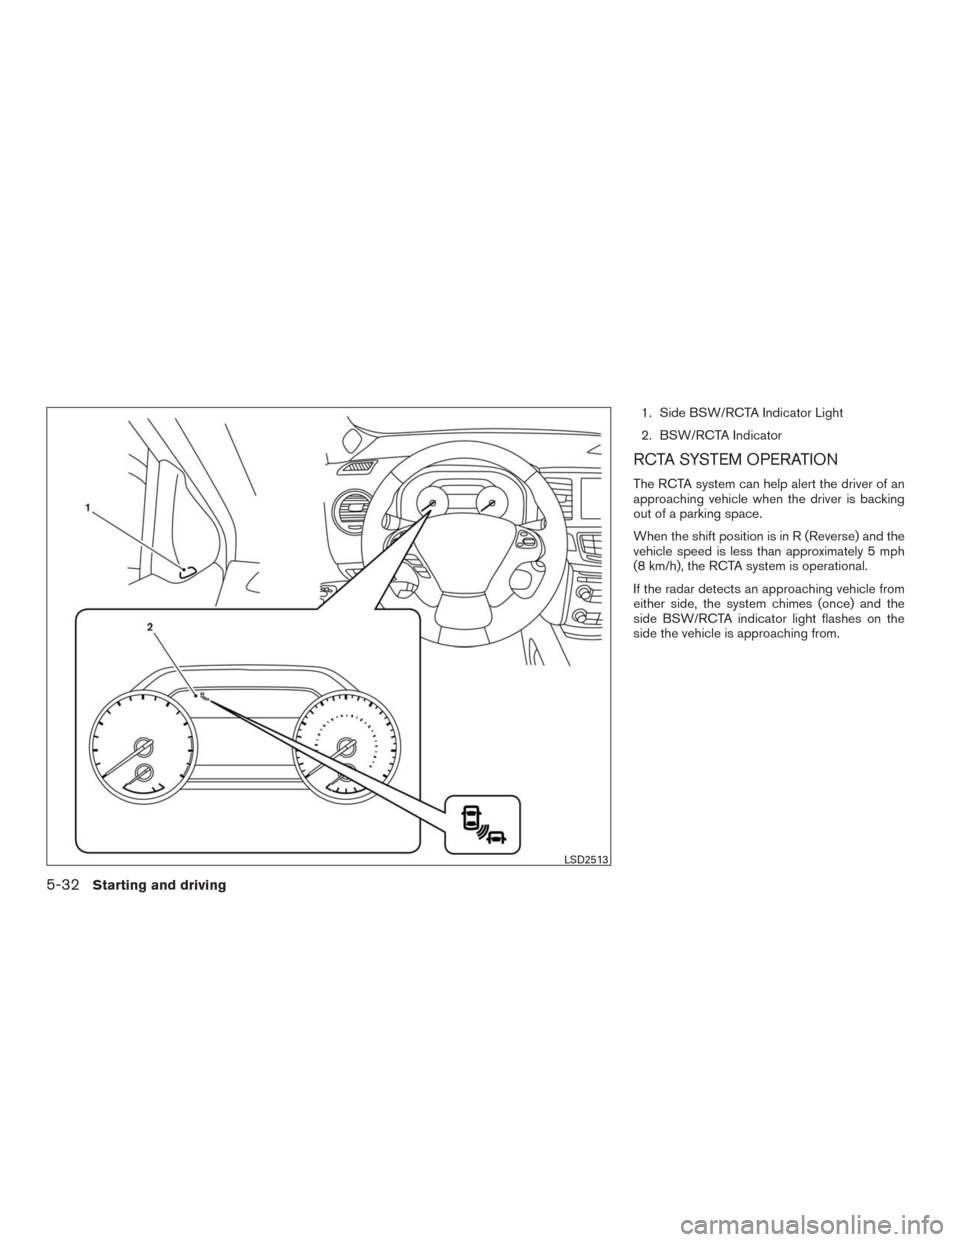 NISSAN MURANO 2016 3.G Owners Manual 1. Side BSW/RCTA Indicator Light
2. BSW/RCTA Indicator
RCTA SYSTEM OPERATION
The RCTA system can help alert the driver of an
approaching vehicle when the driver is backing
out of a parking space.
When